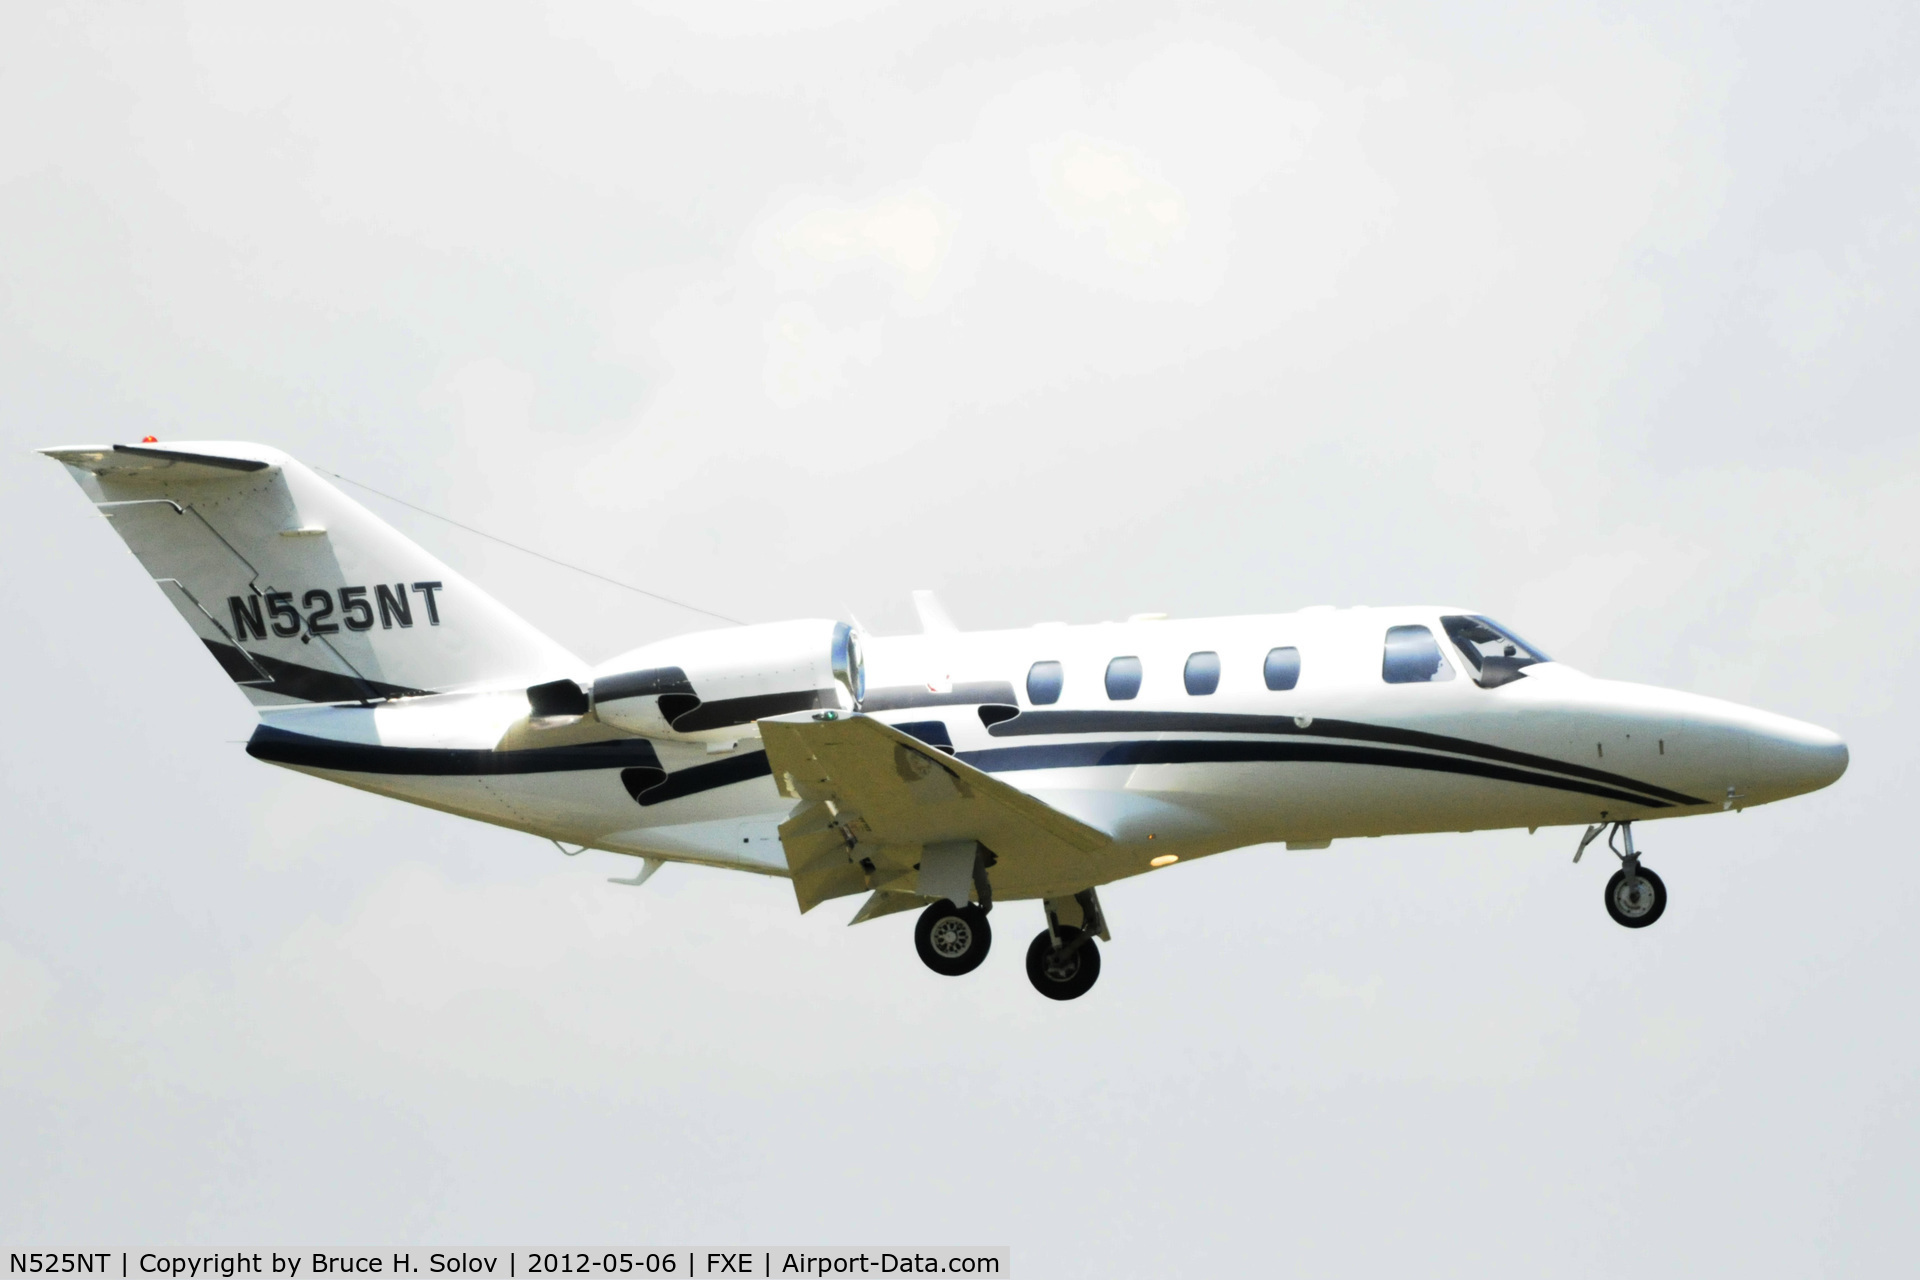 N525NT, 2001 Cessna 525 CitationJet CJ1 C/N 525-0440, on approach to FXE